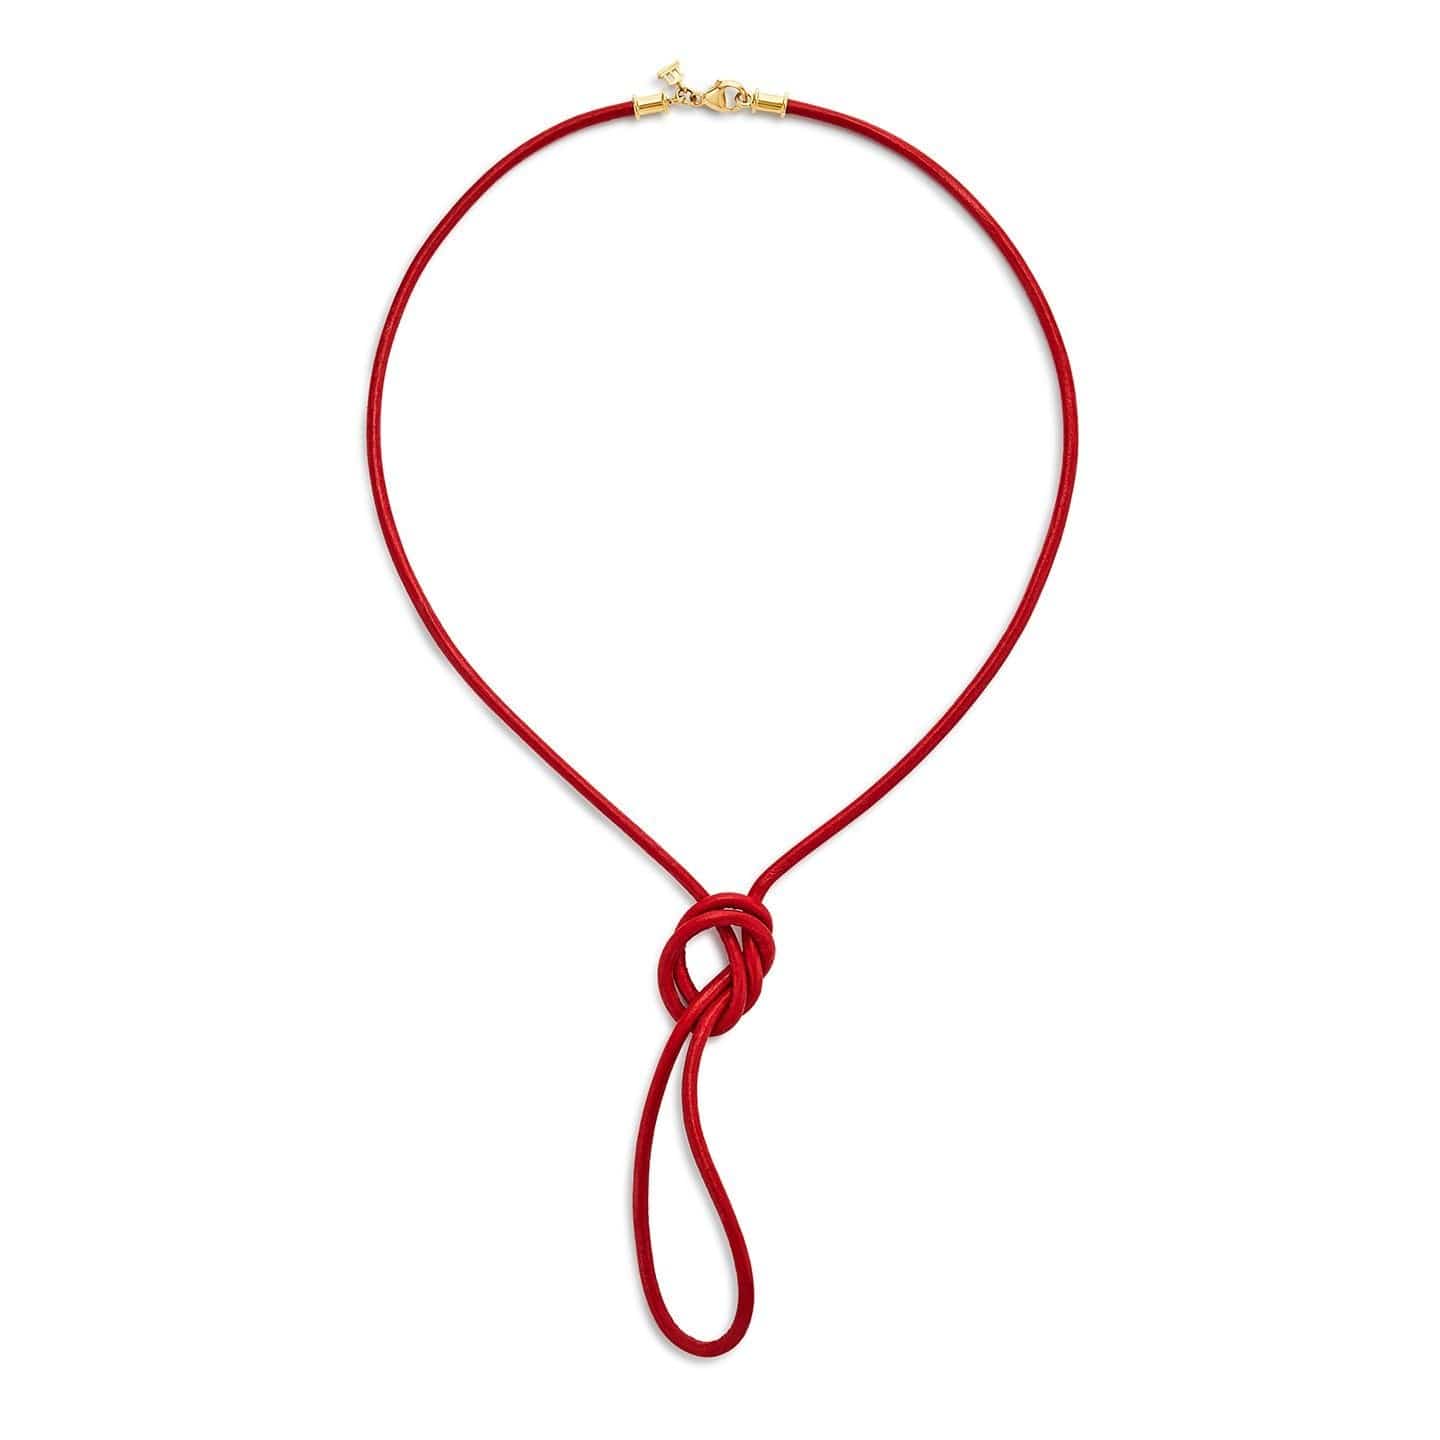 18K Yellow Gold Red Leather Cord Necklace, yellow gold, Long's Jewelers